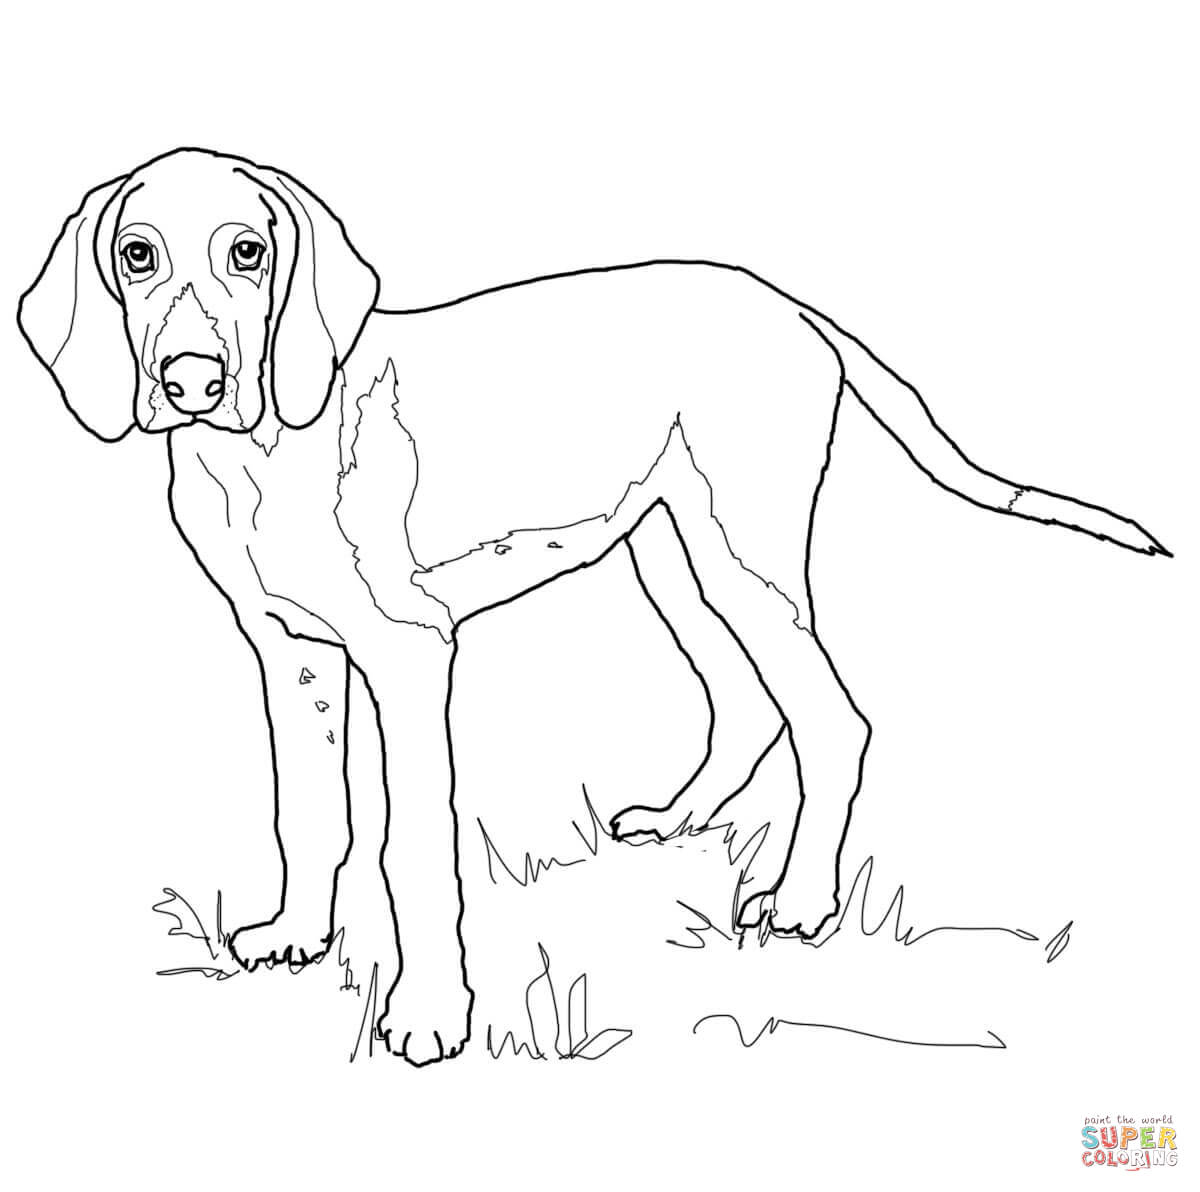 6 Pics of The Fox And Hound Coloring Pages - Fox and Hound ...